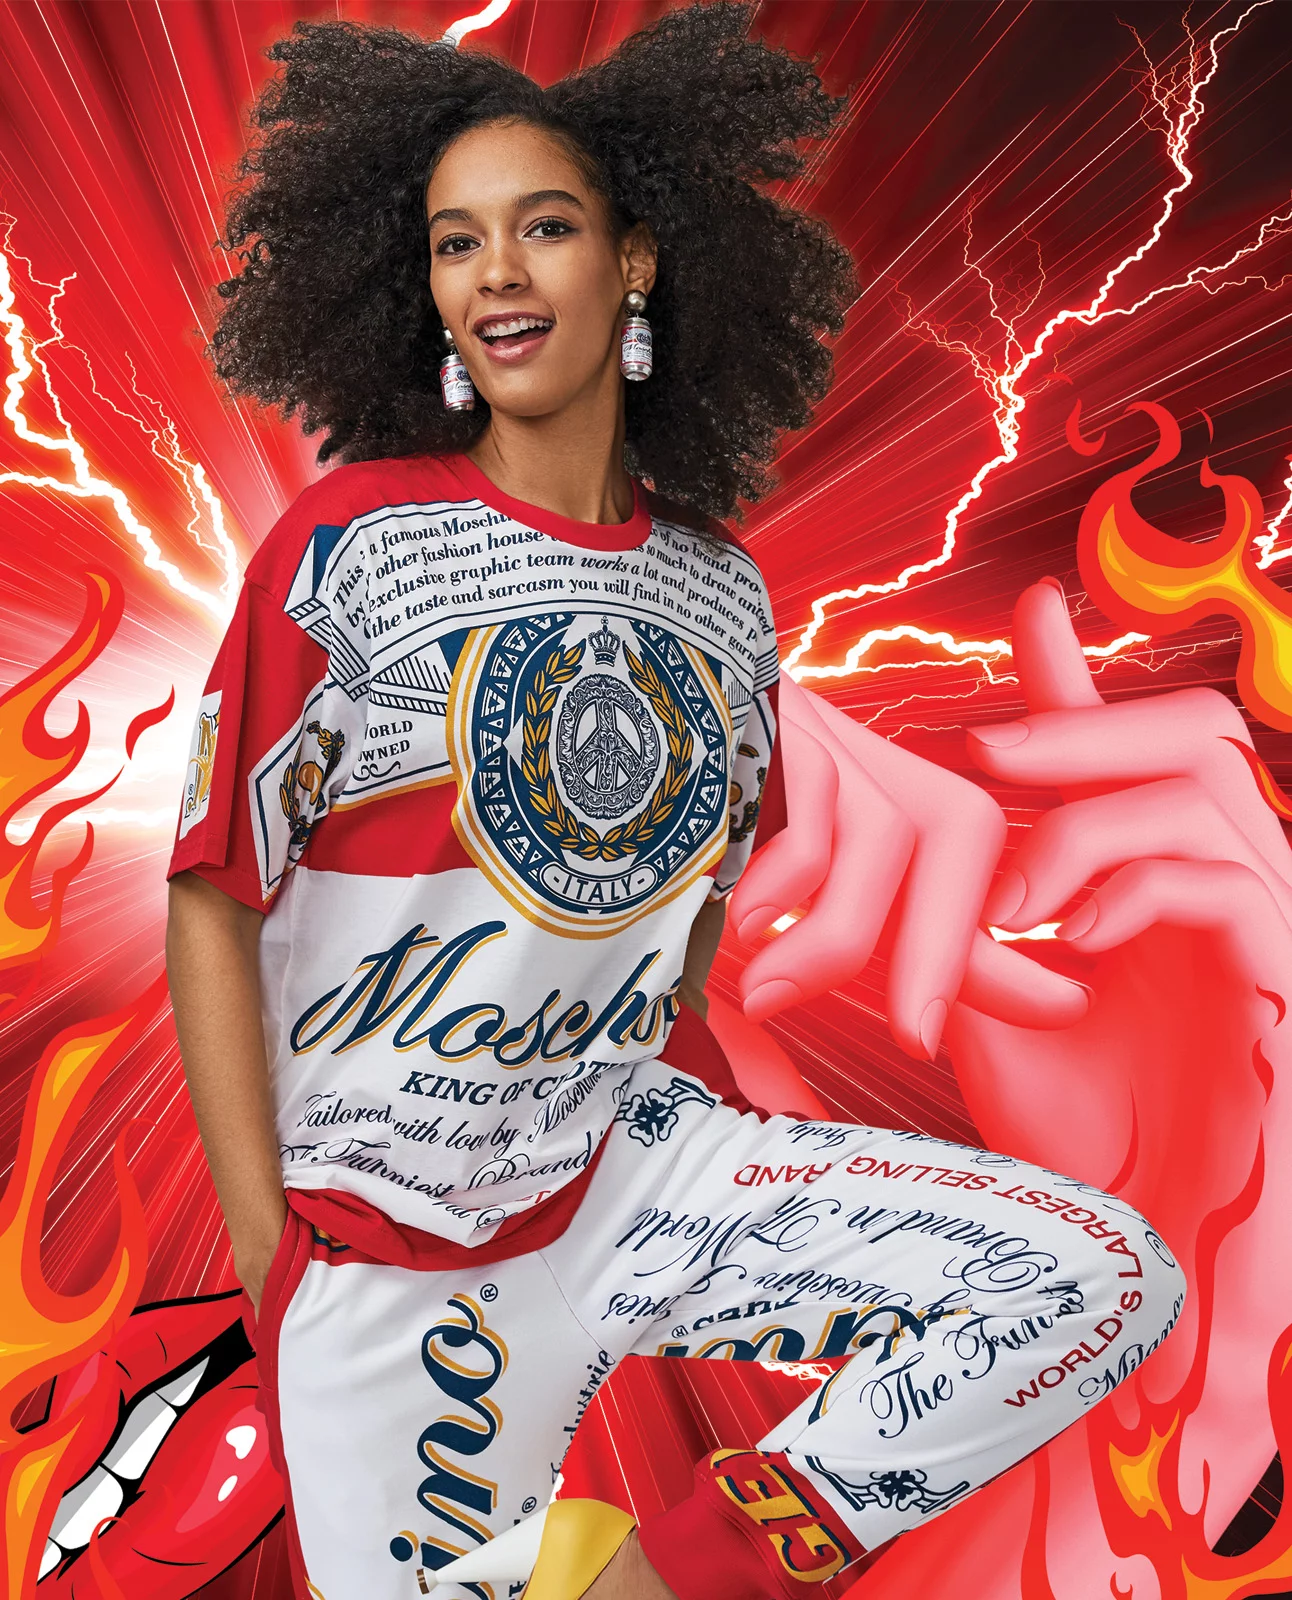 Moschino x Budweiser 5 by Portis WASP